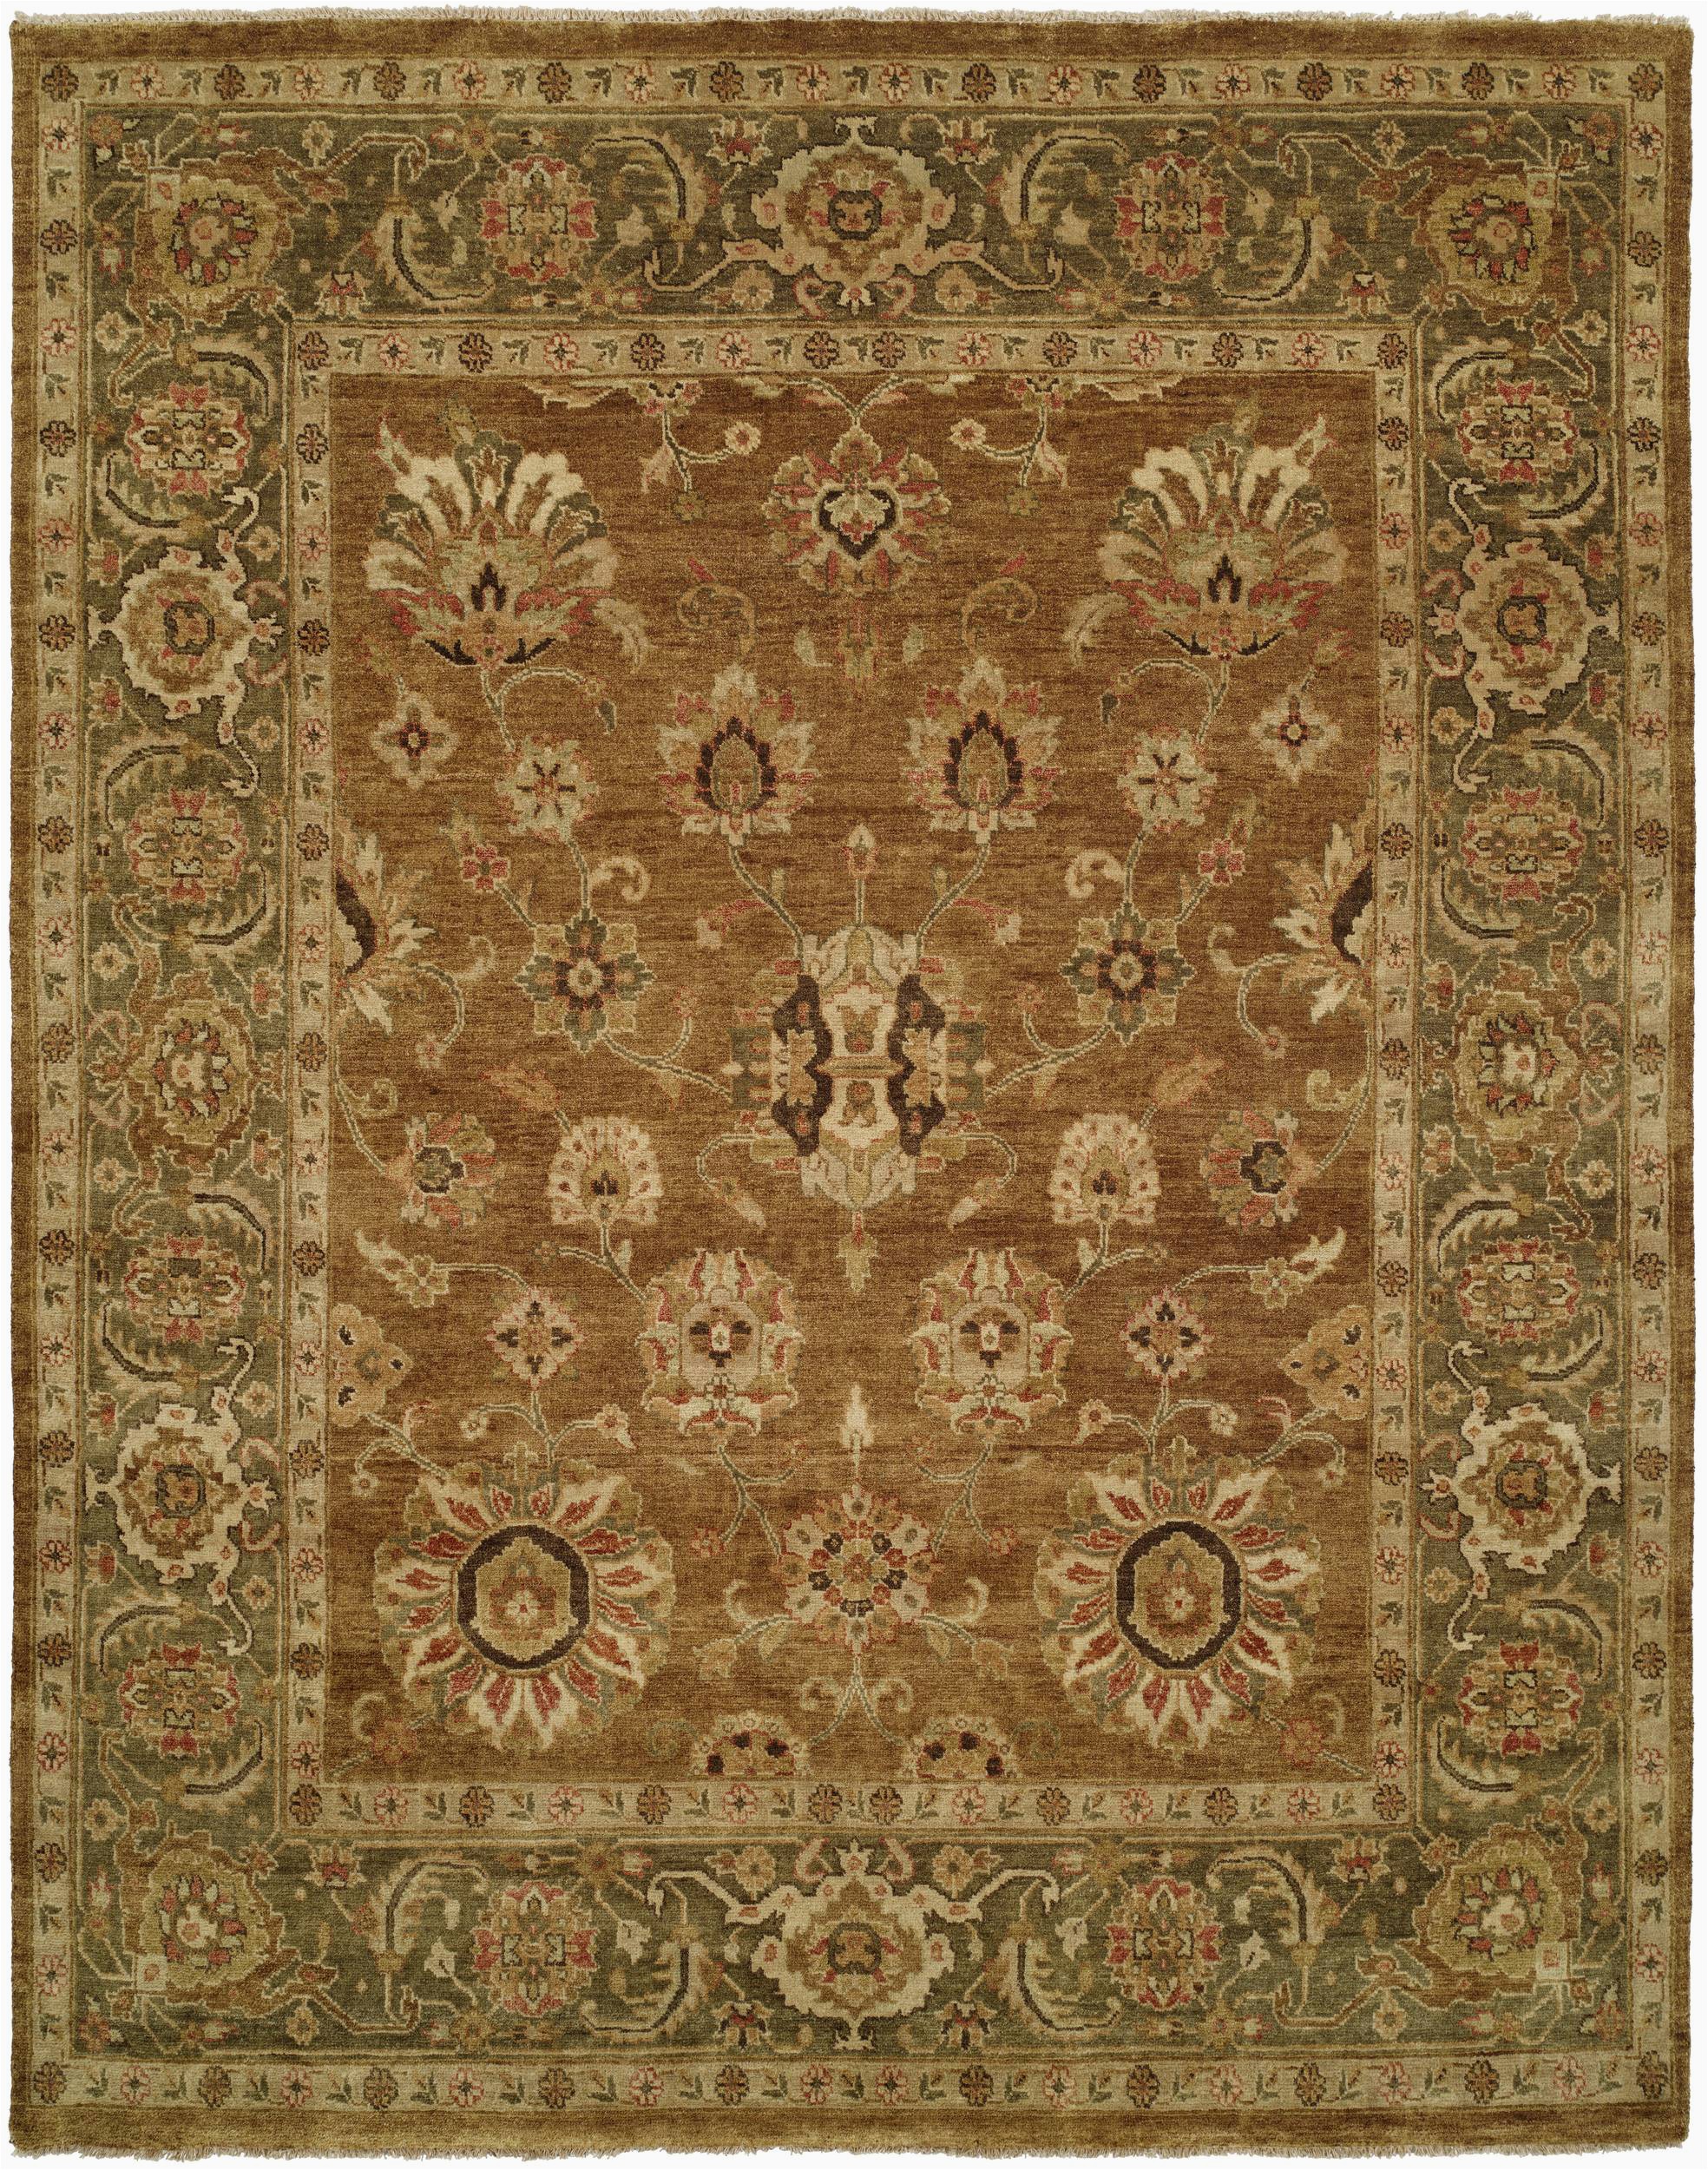 10 Foot by 12 Foot area Rugs Kalaty Oushak Brown Runner 2 6" X 10 0" area Rug Ou 452 2610 835